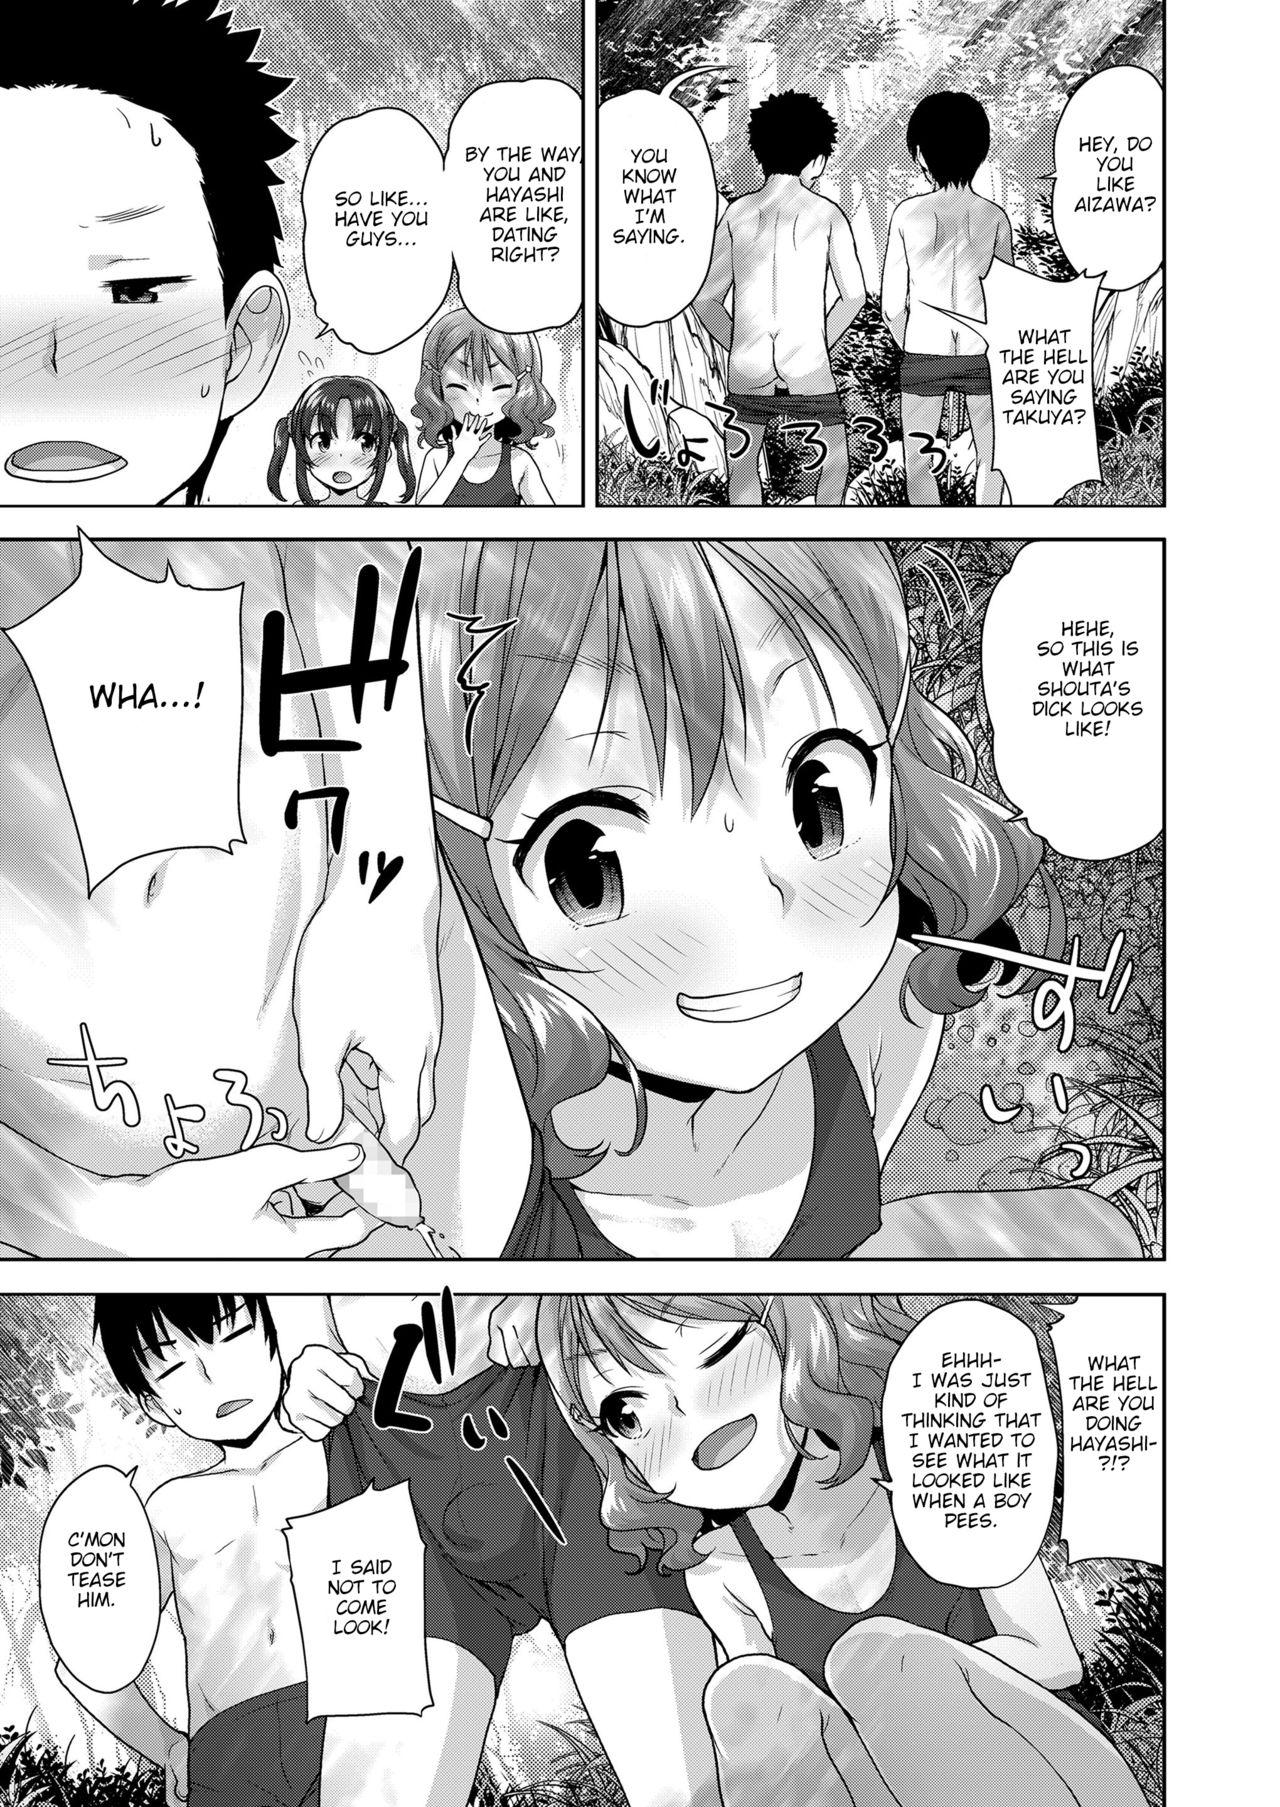 Ex Gf Issho ni H de Asonjao | Let's do Lewd Things Together! Pure18 - Page 3